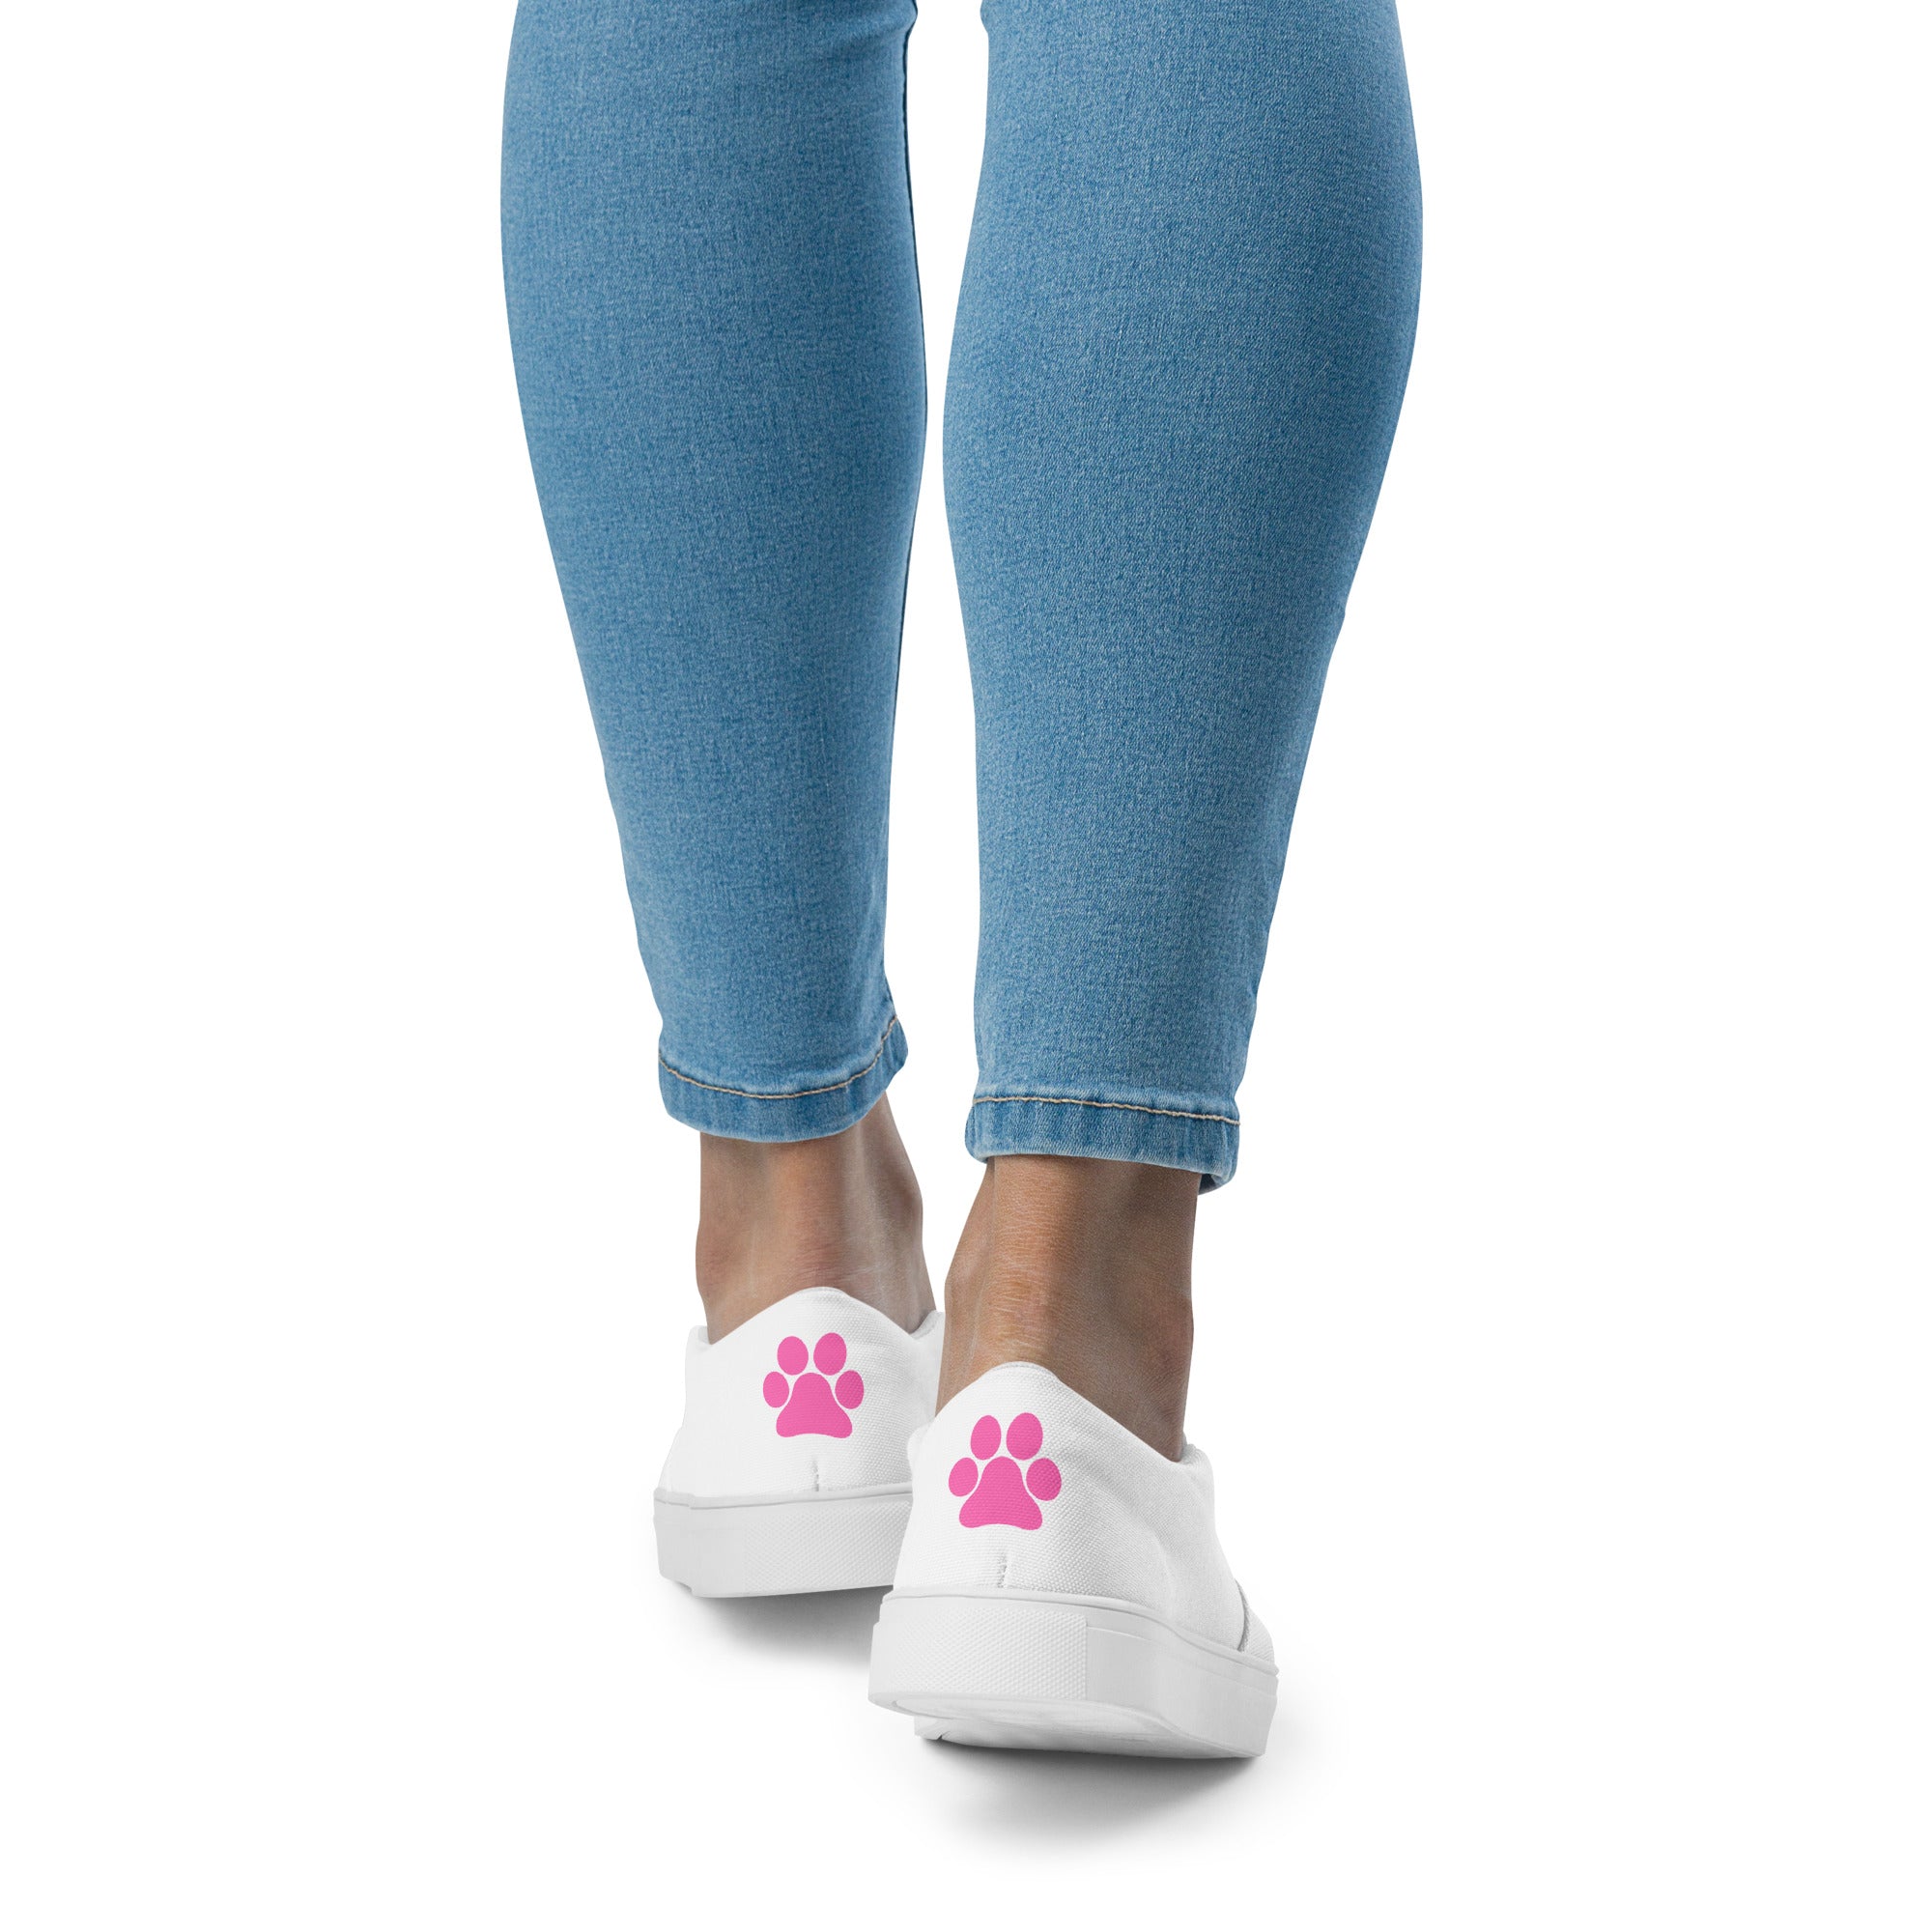 Women’s slip-on Hot Pink Paw shoes